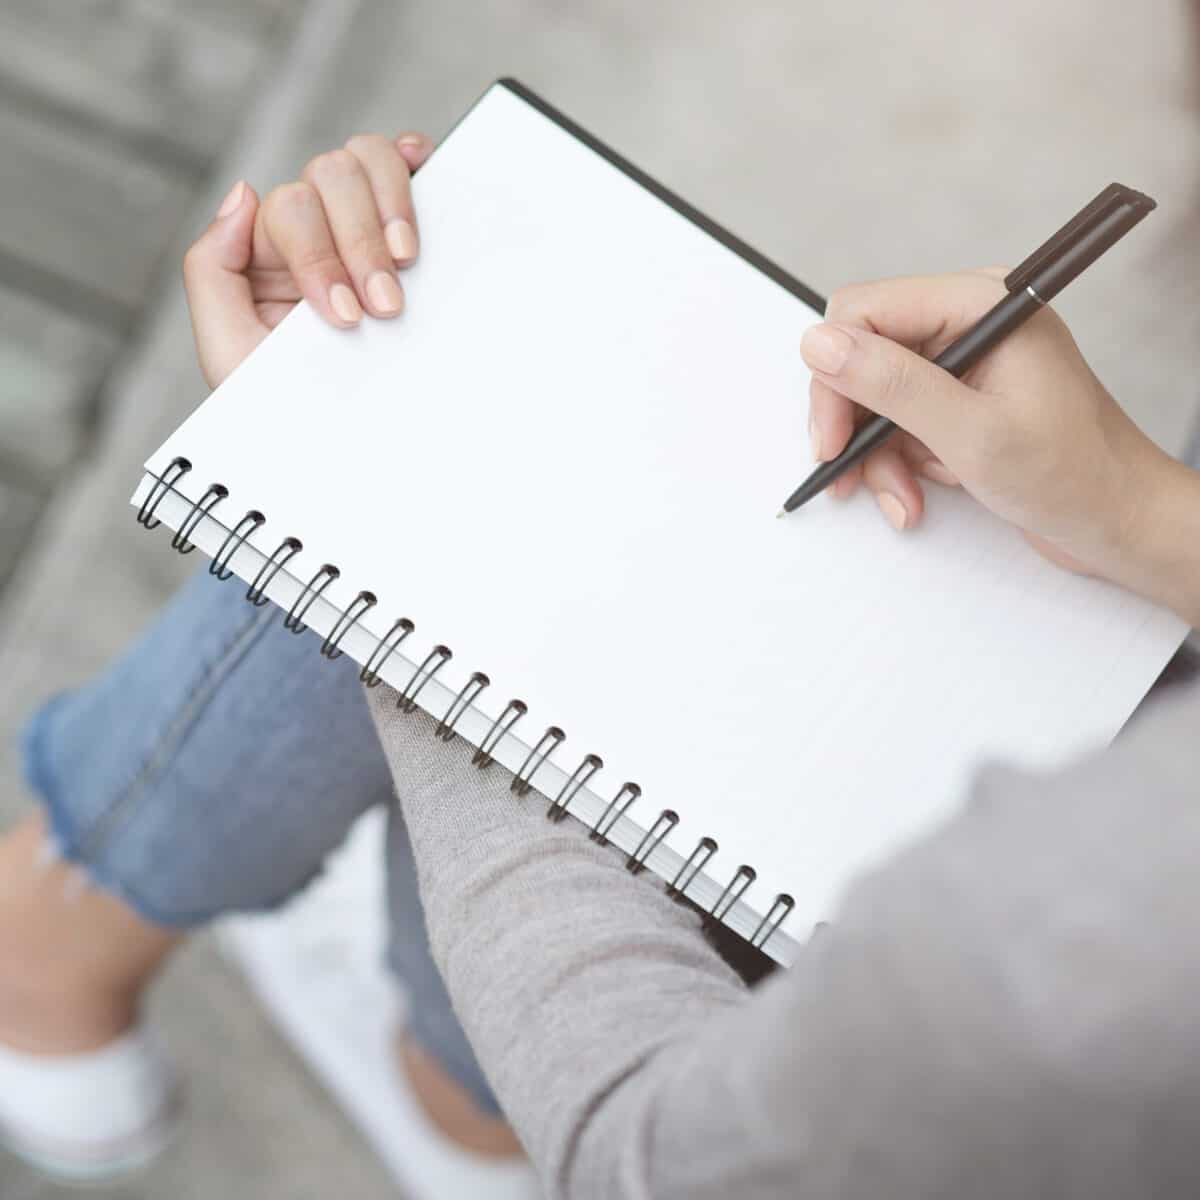 A person sitting with crossed legs and a sketch book on her lap and pencil in hand preparing to practice drawing.